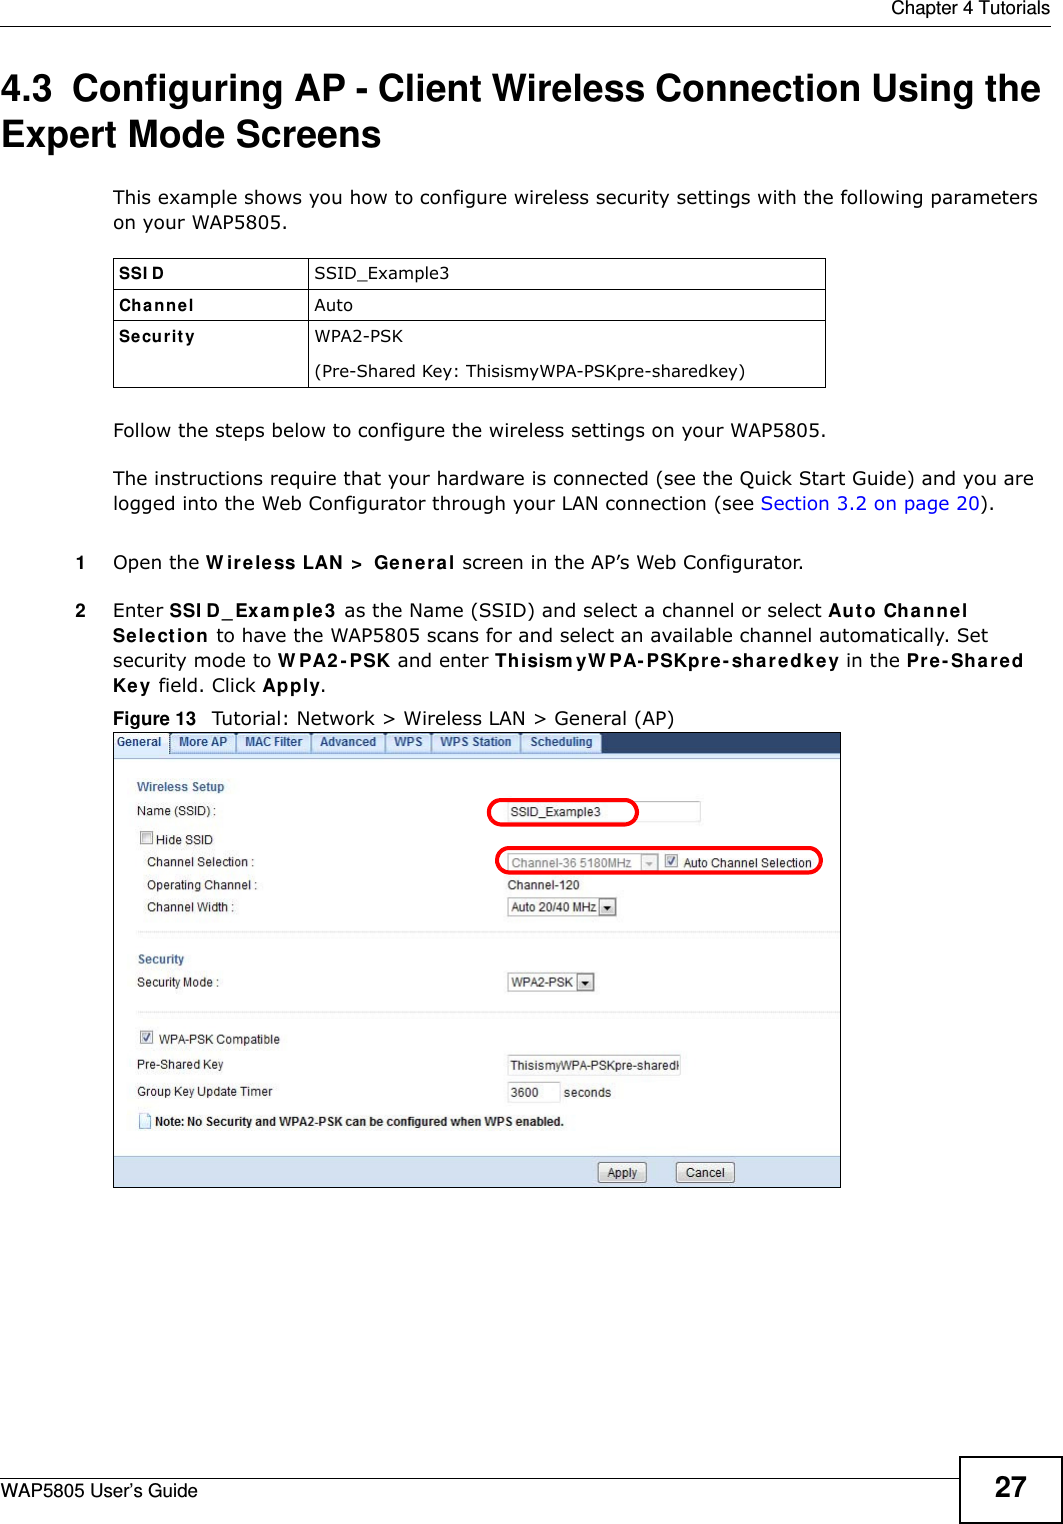  Chapter 4 TutorialsWAP5805 User’s Guide 274.3  Configuring AP - Client Wireless Connection Using the Expert Mode ScreensThis example shows you how to configure wireless security settings with the following parameters on your WAP5805.Follow the steps below to configure the wireless settings on your WAP5805.The instructions require that your hardware is connected (see the Quick Start Guide) and you are logged into the Web Configurator through your LAN connection (see Section 3.2 on page 20).1Open the Wireless LAN &gt; General screen in the AP’s Web Configurator.2Enter SSID_Example3 as the Name (SSID) and select a channel or select Auto Channel Selection to have the WAP5805 scans for and select an available channel automatically. Set security mode to WPA2-PSK and enter ThisismyWPA-PSKpre-sharedkey in the Pre-Shared Key field. Click Apply.Figure 13   Tutorial: Network &gt; Wireless LAN &gt; General (AP)SSID SSID_Example3Channel AutoSecurity  WPA2-PSK(Pre-Shared Key: ThisismyWPA-PSKpre-sharedkey)